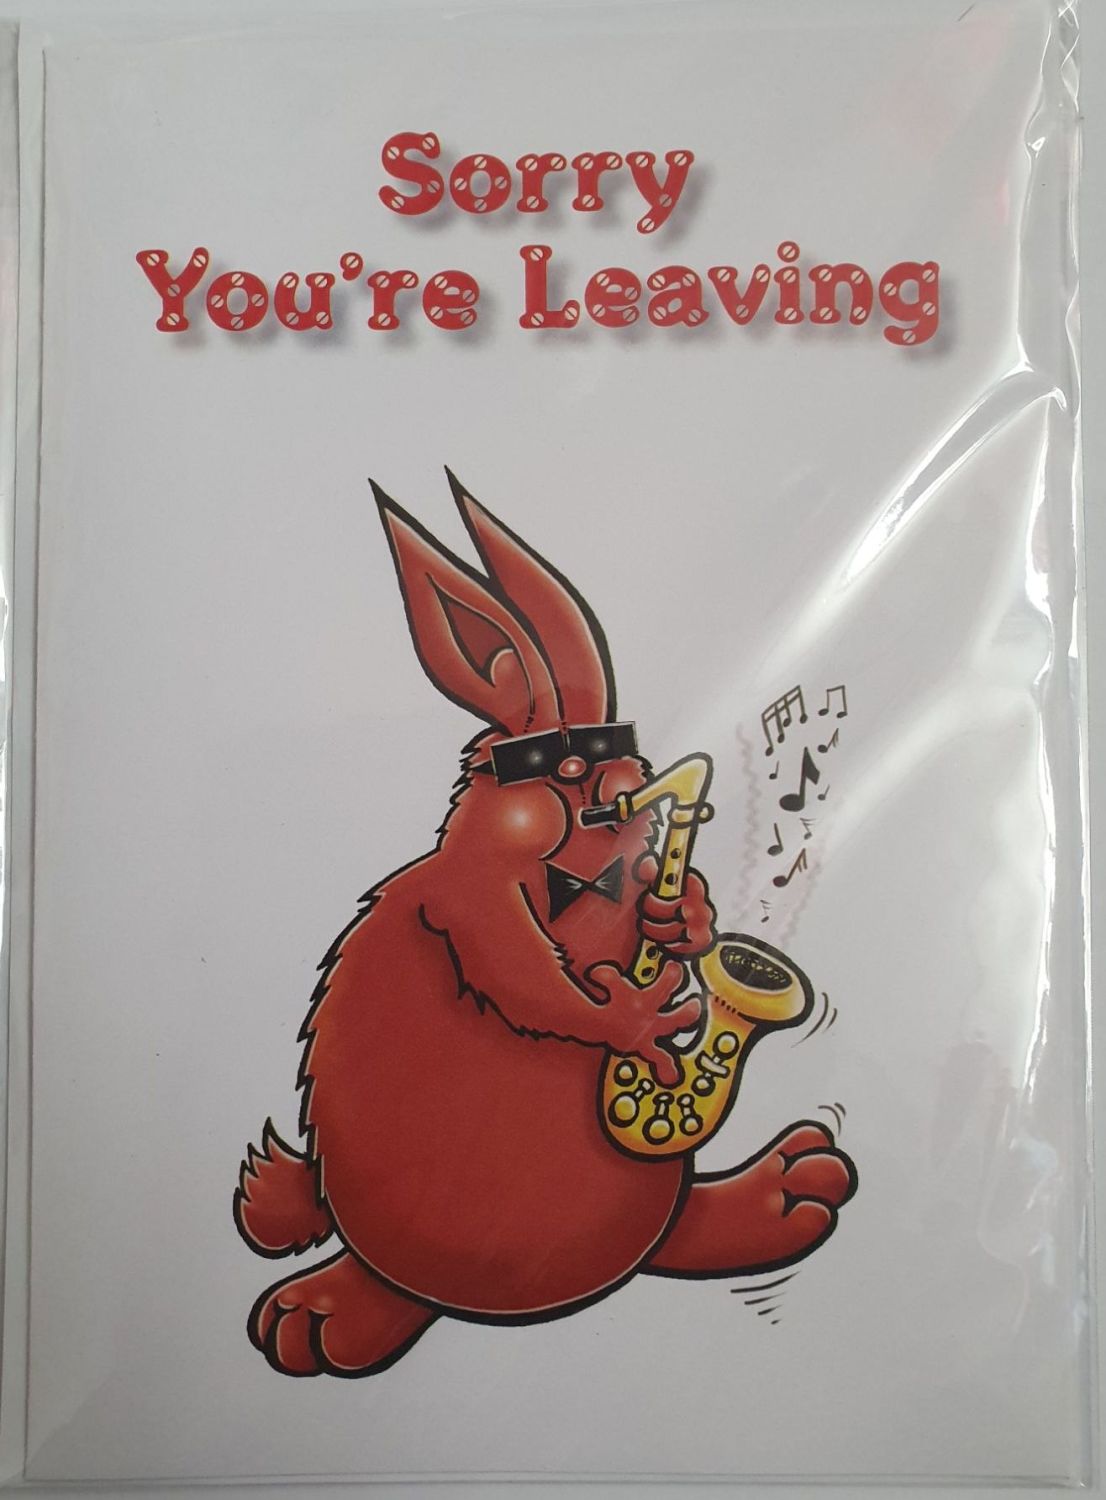 Sorry You're Leaving - Greeting Card - Rabbit with Saxophone